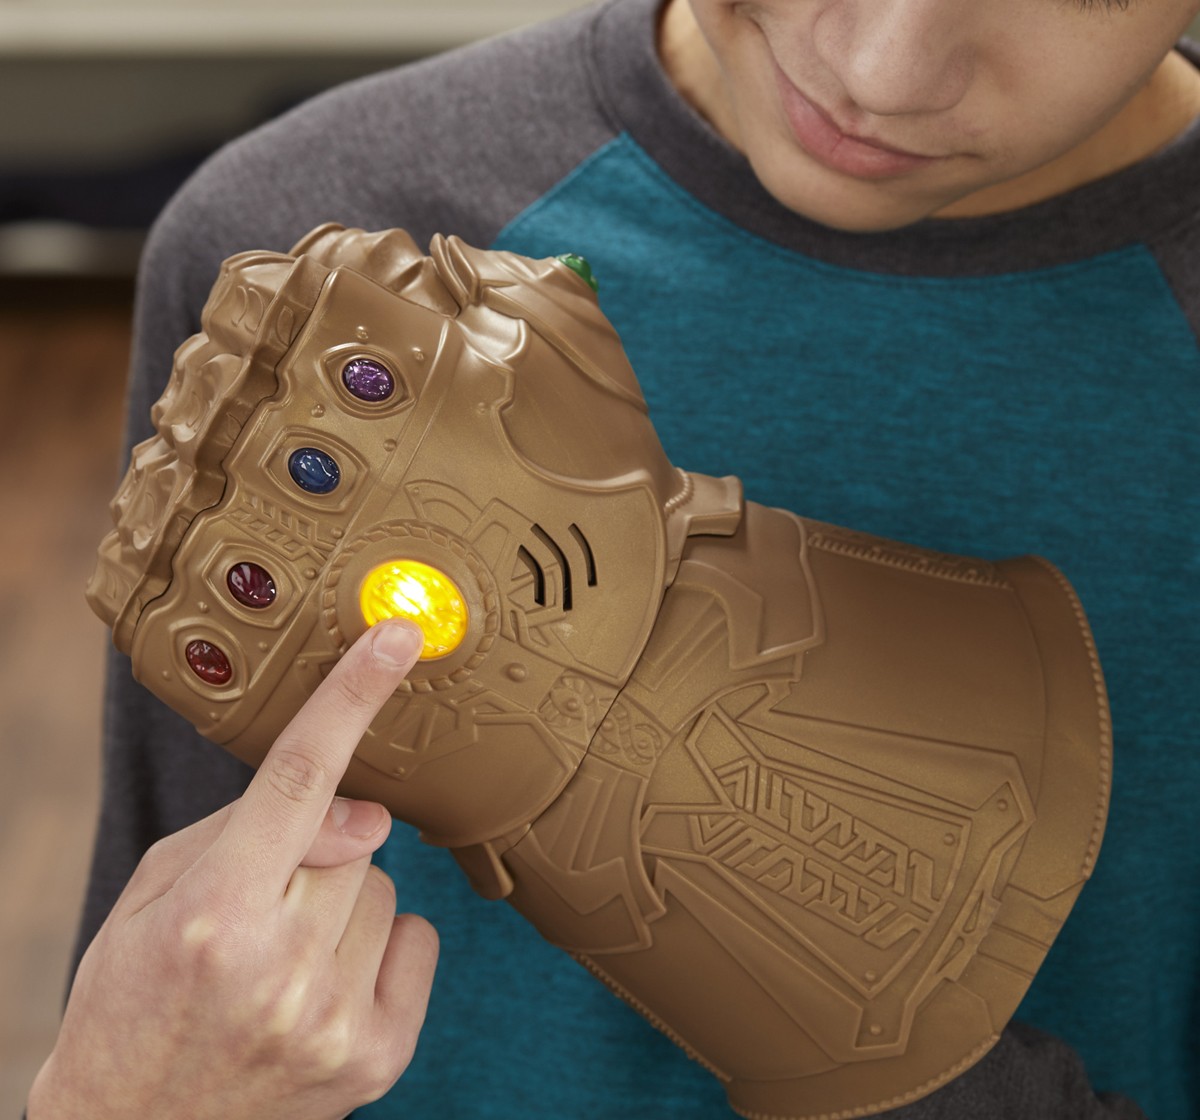 Marvel Avengers: Infinity War Infinity Gauntlet Electronic Fist Roleplay Toy With Lights & Sounds, 5Y+